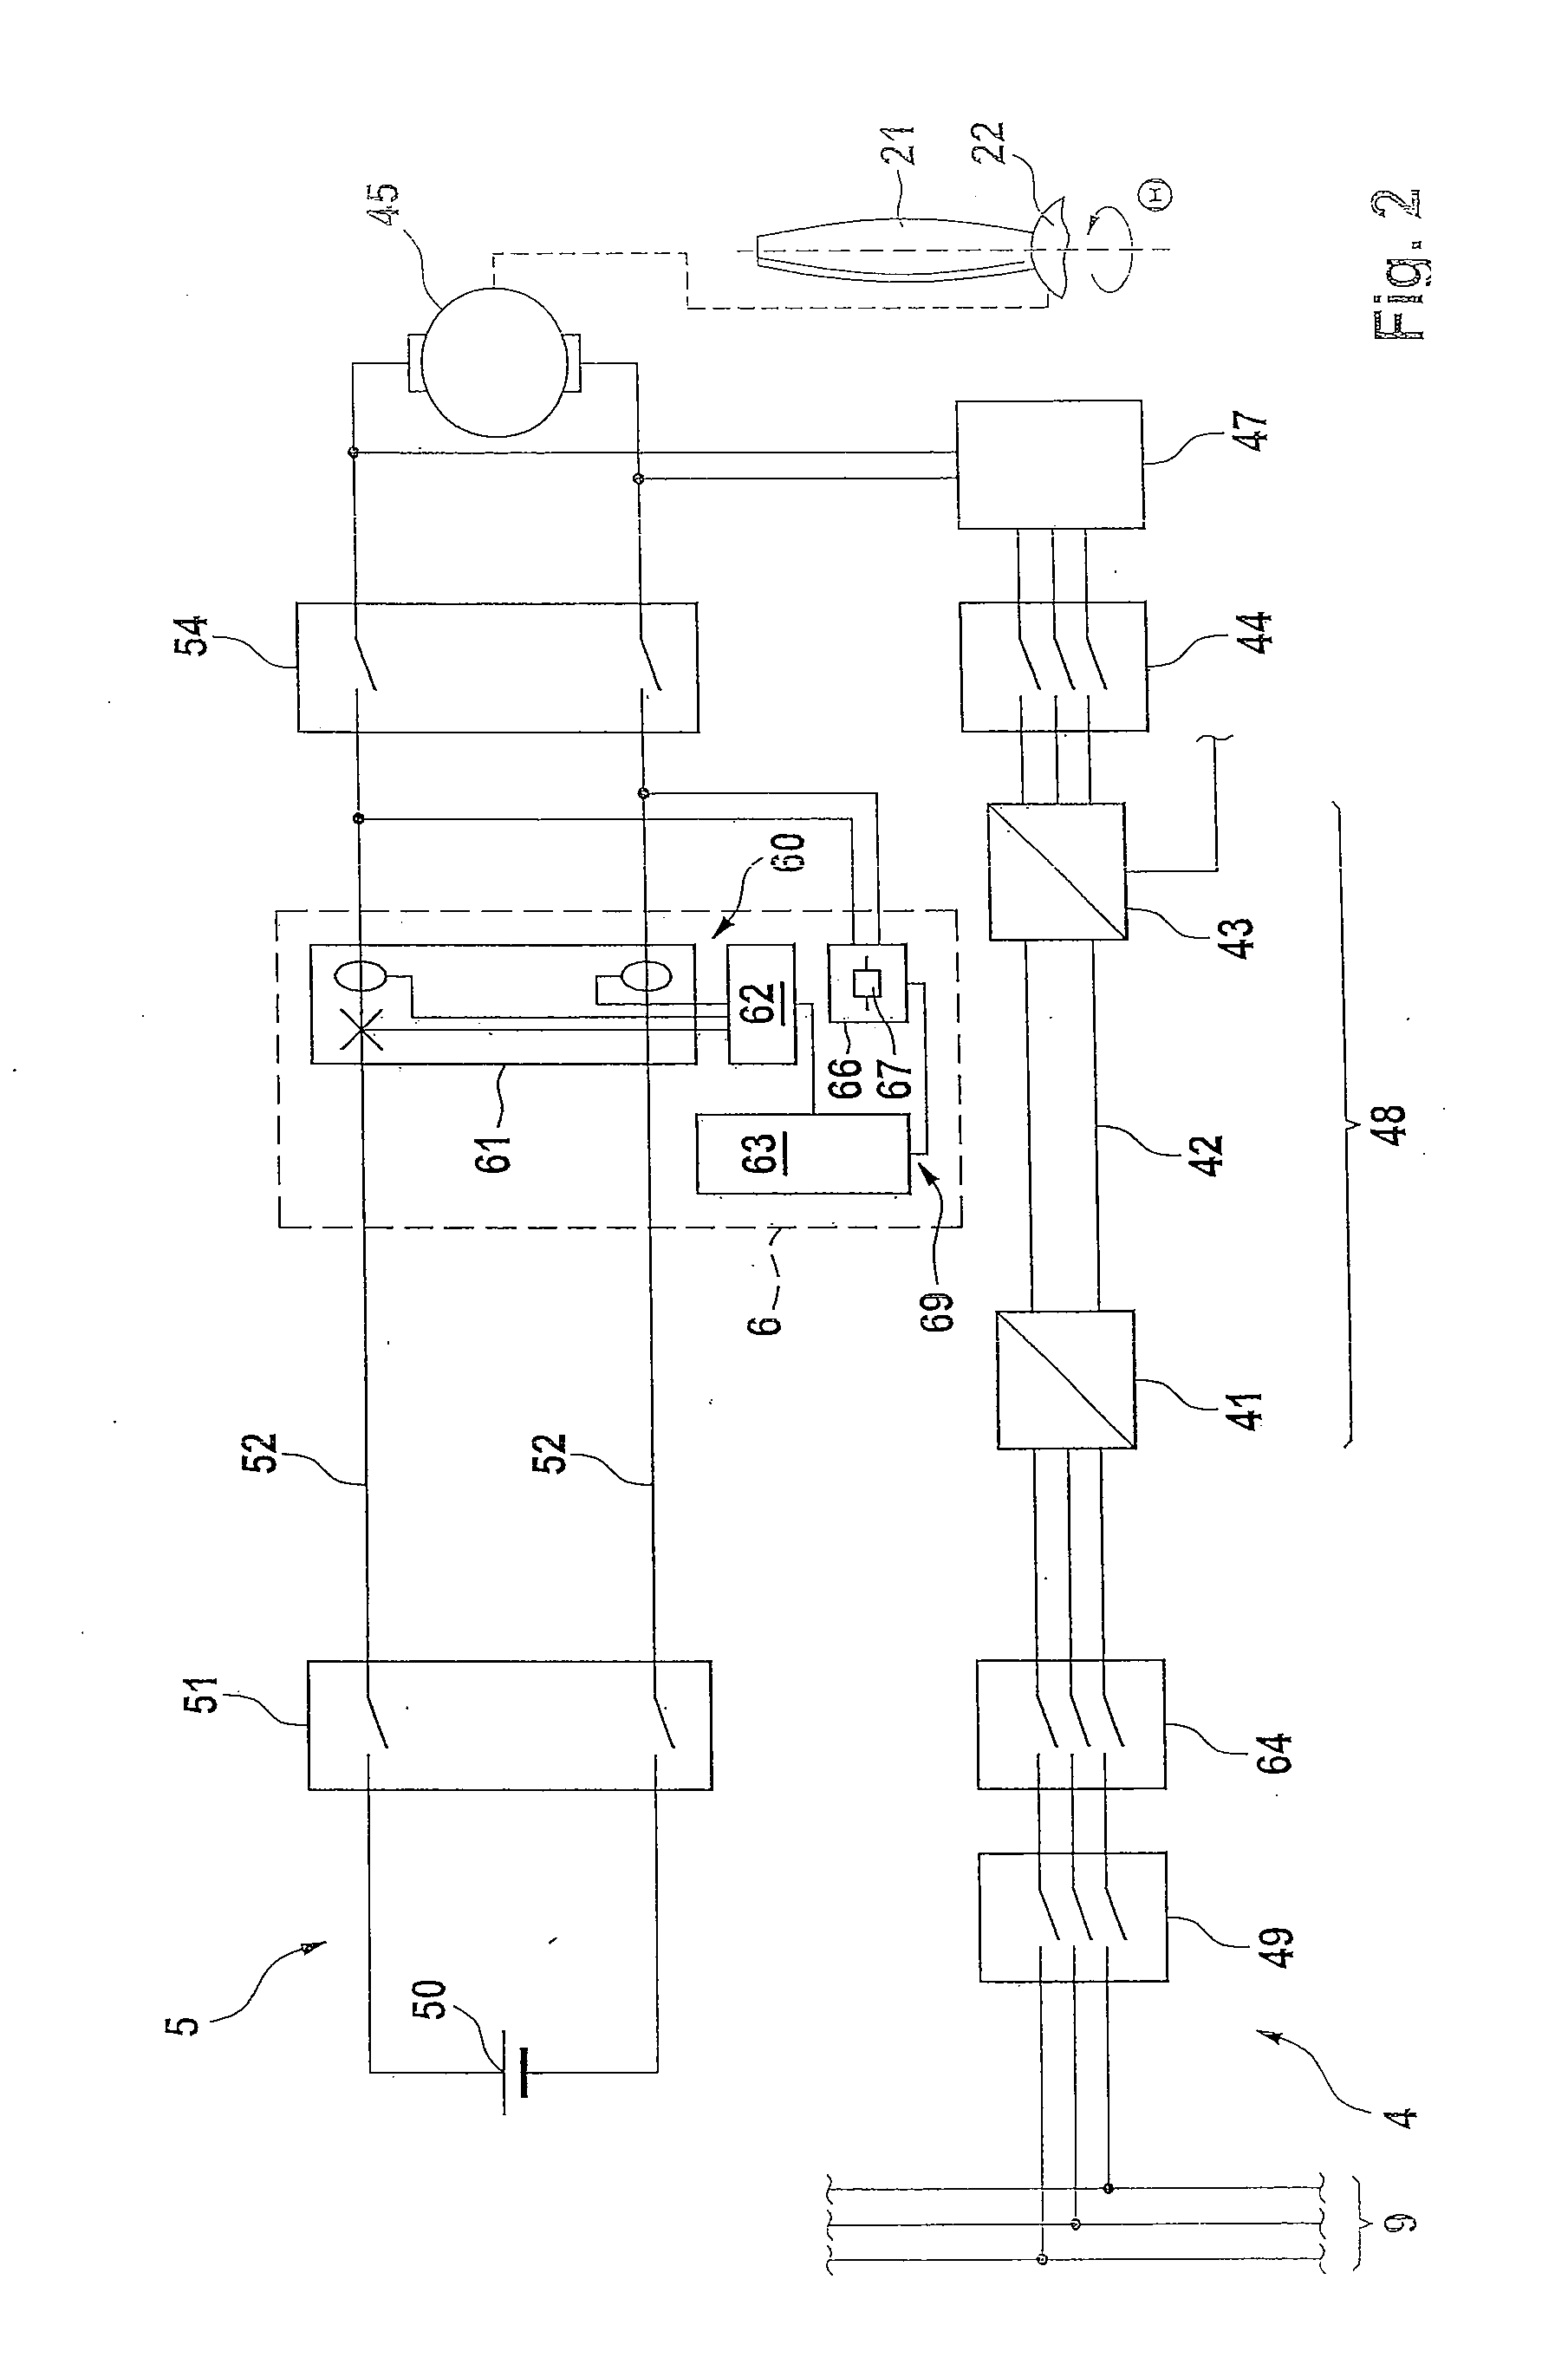 Energy Supply for a Blade Adjustment Device Pertaining to a Wind Energy Installation